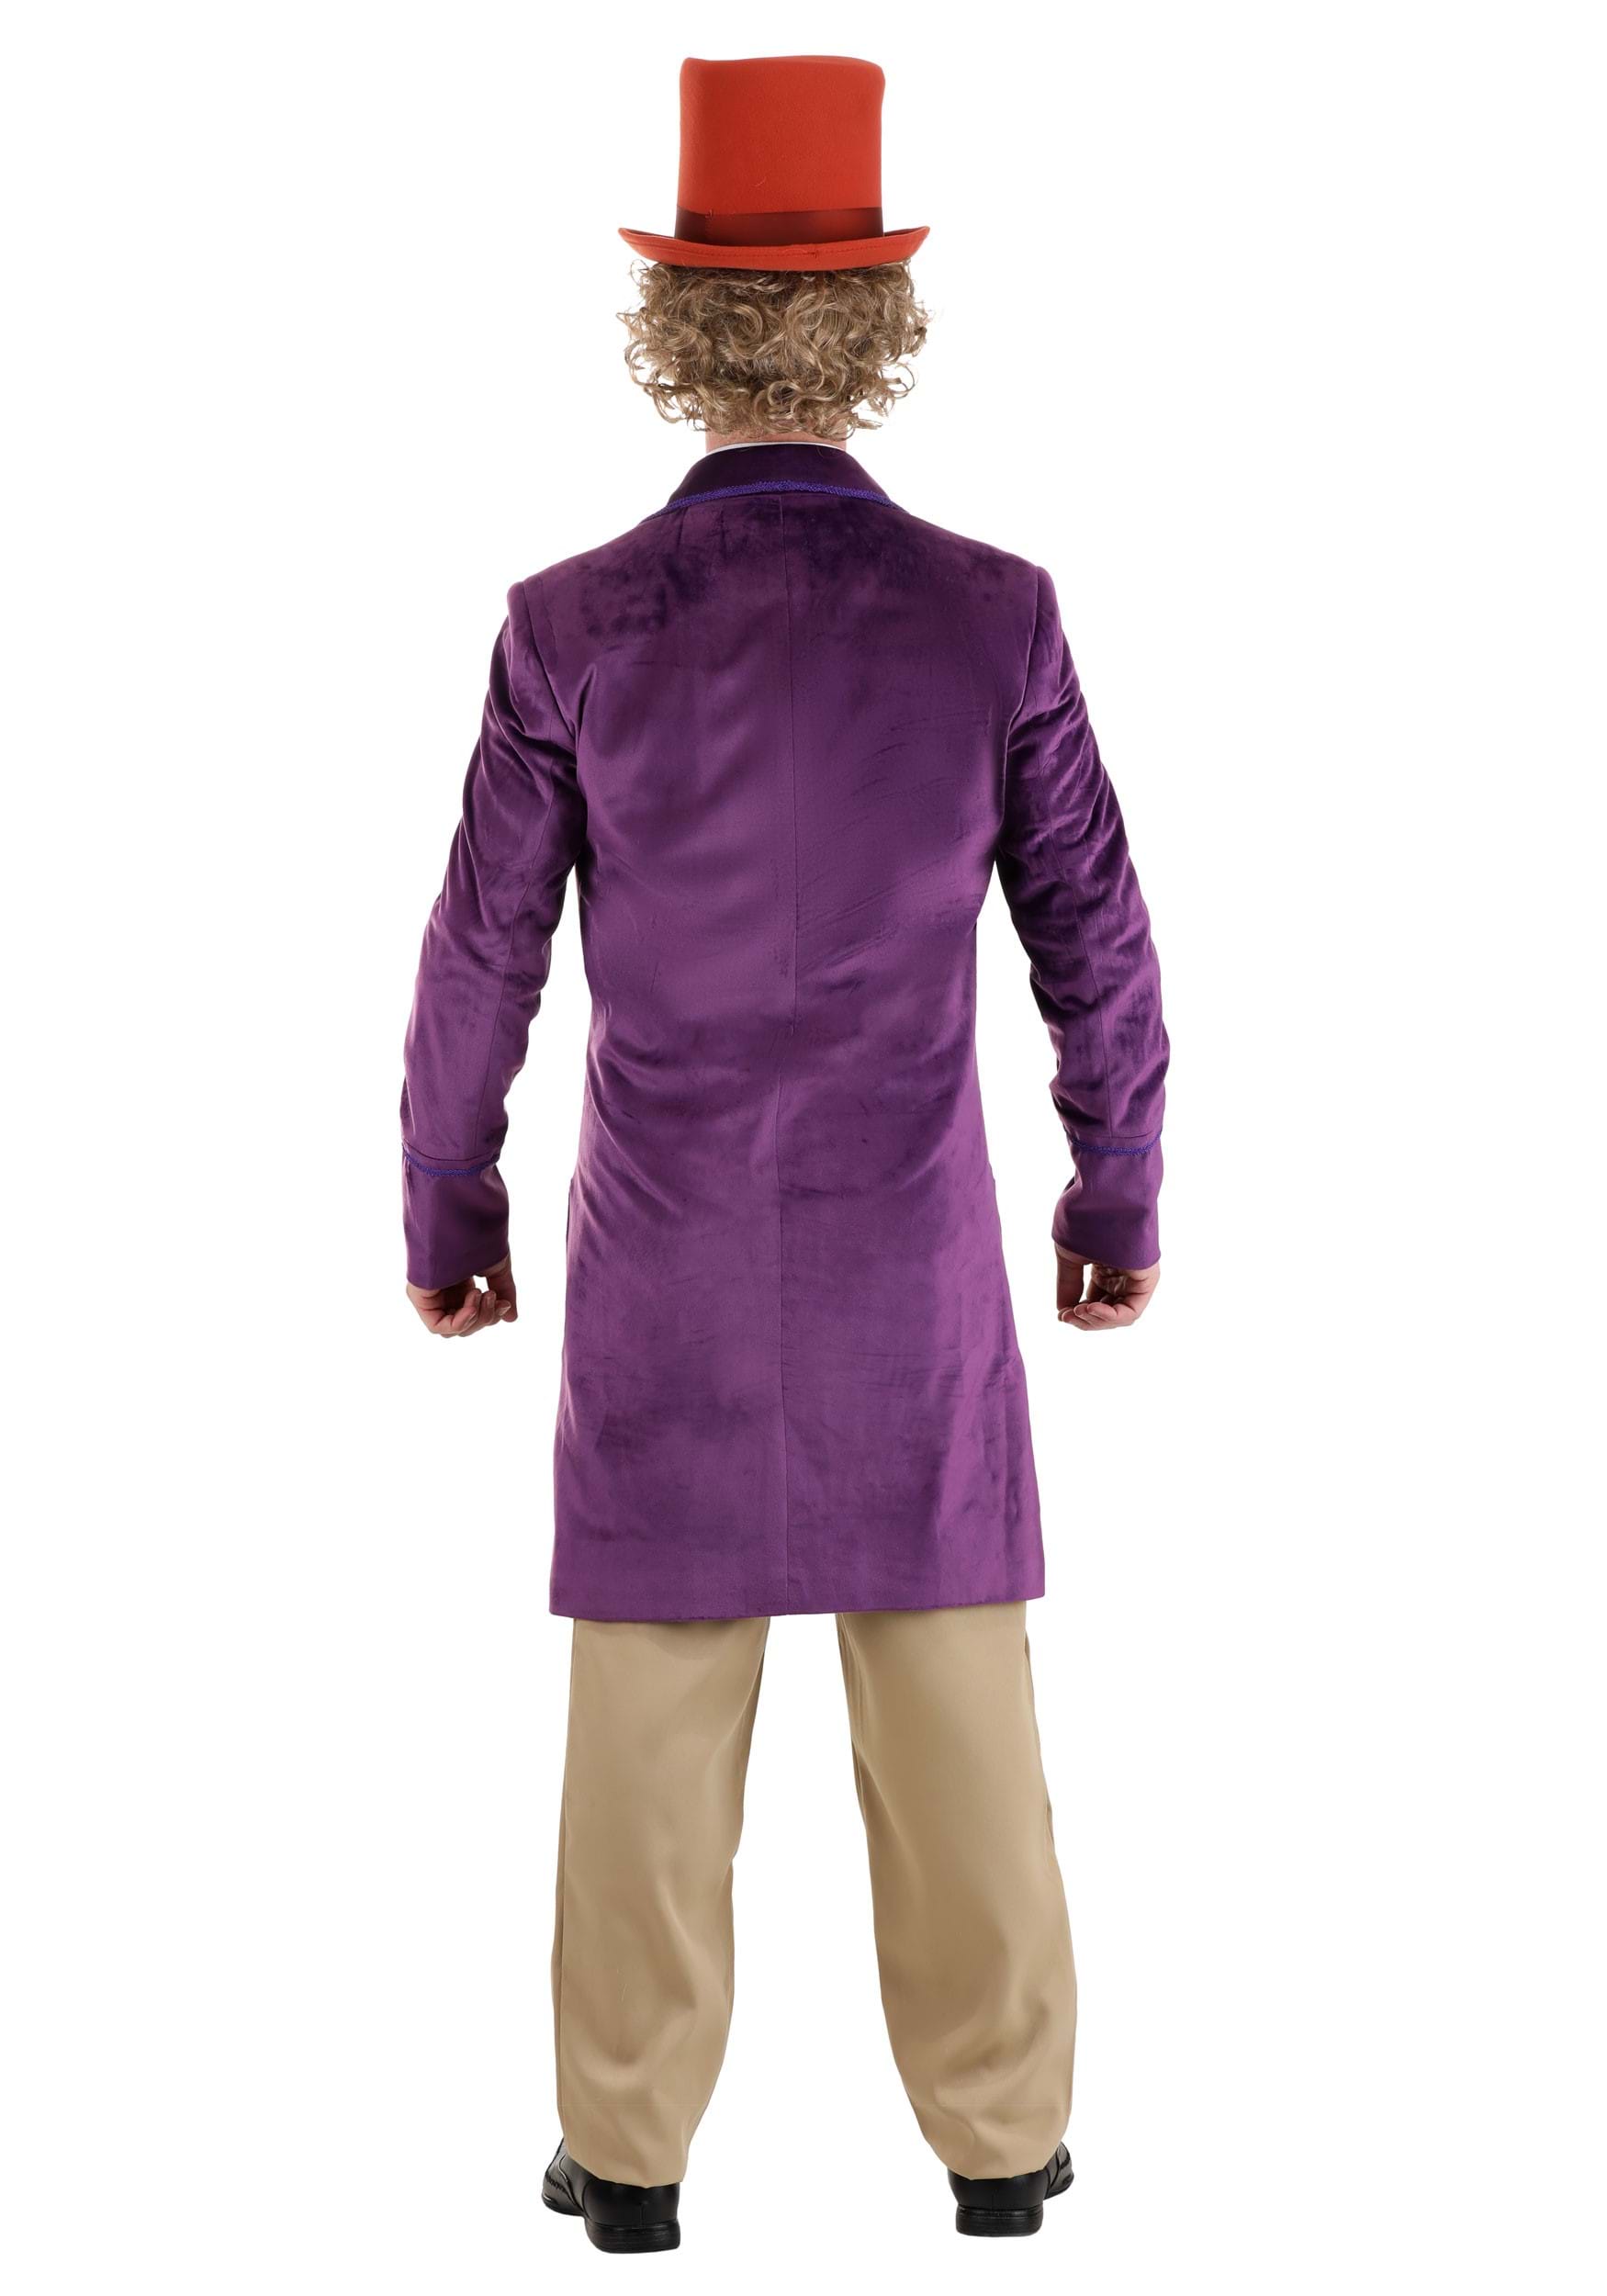 Authentic Willy Wonka Men's Costume Jacket , Adult Costumes